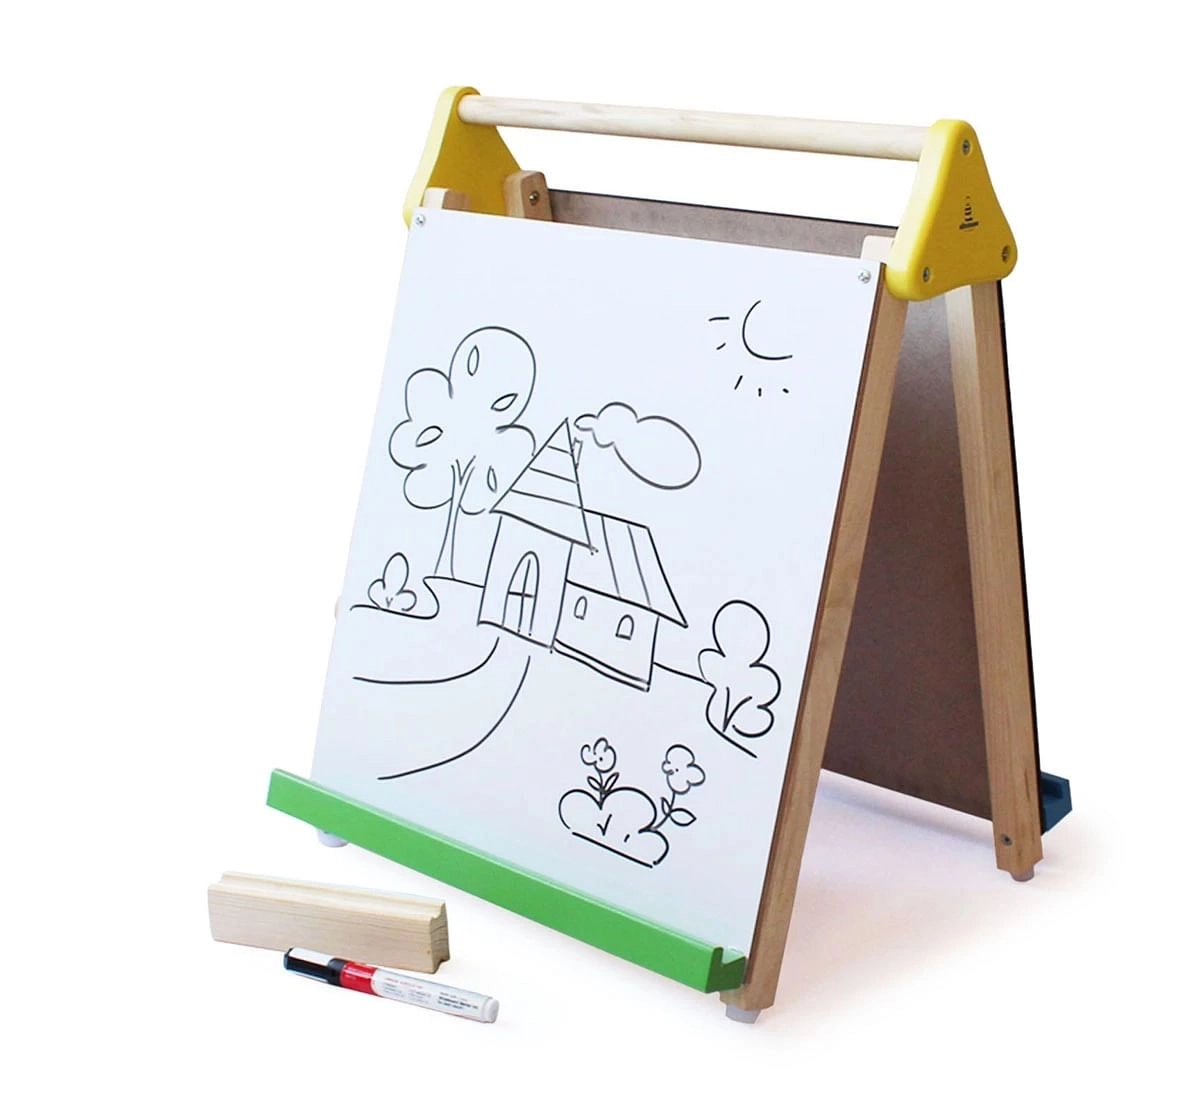 Shumee Tabletop 3 in 1 Drawing Board for kids 18M+, Multicolour